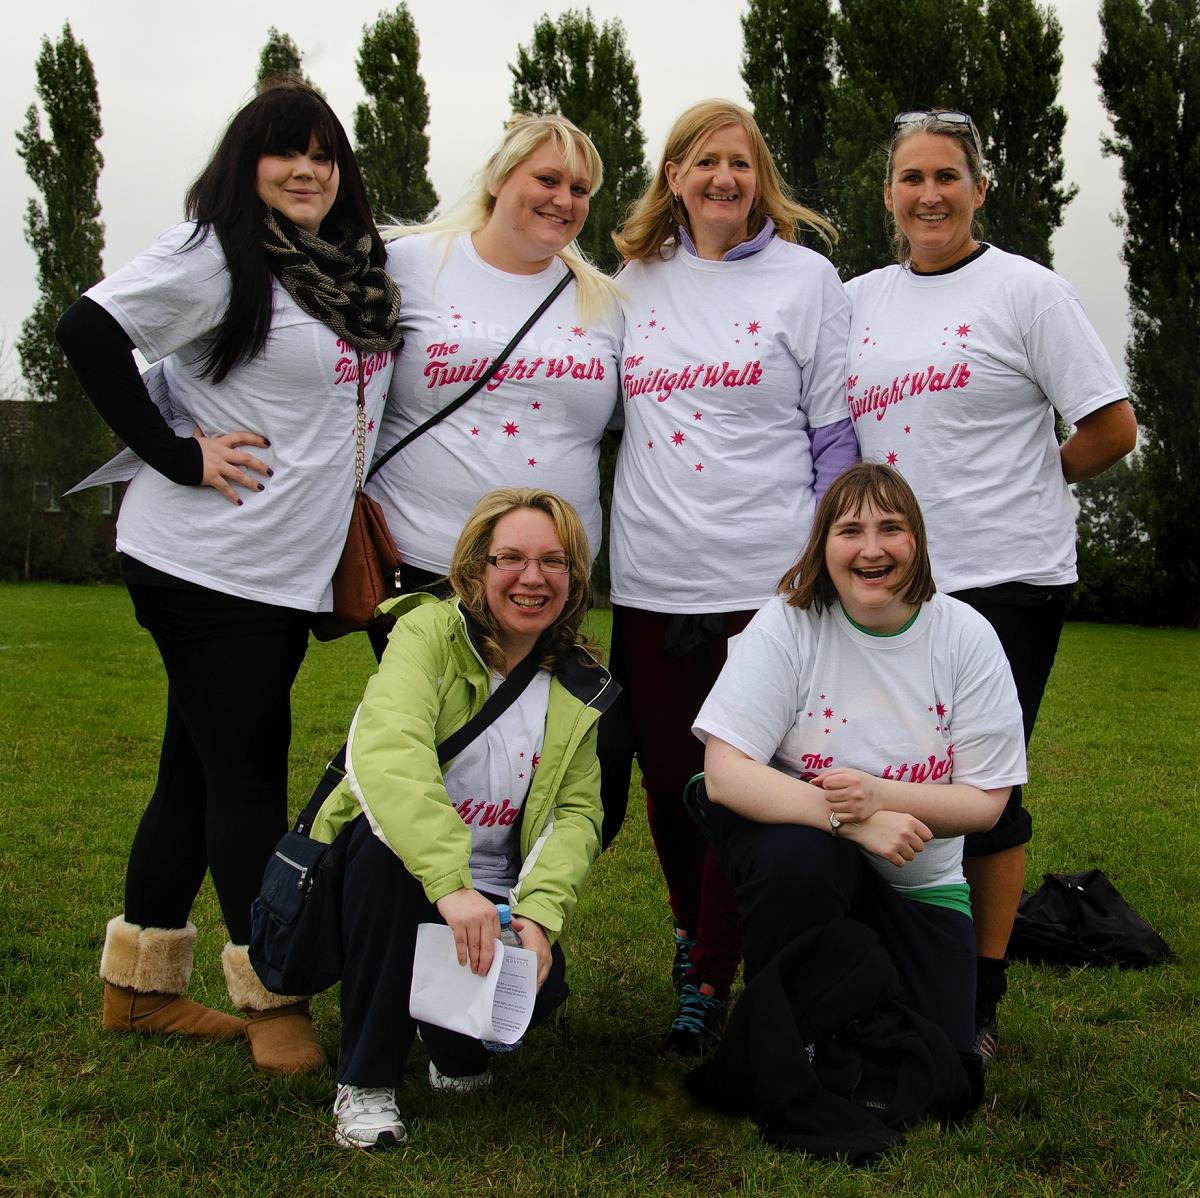 Women of all ages walked through the streets of Finchley as darkness fell on Saturday to raise money for the North London Hospice.